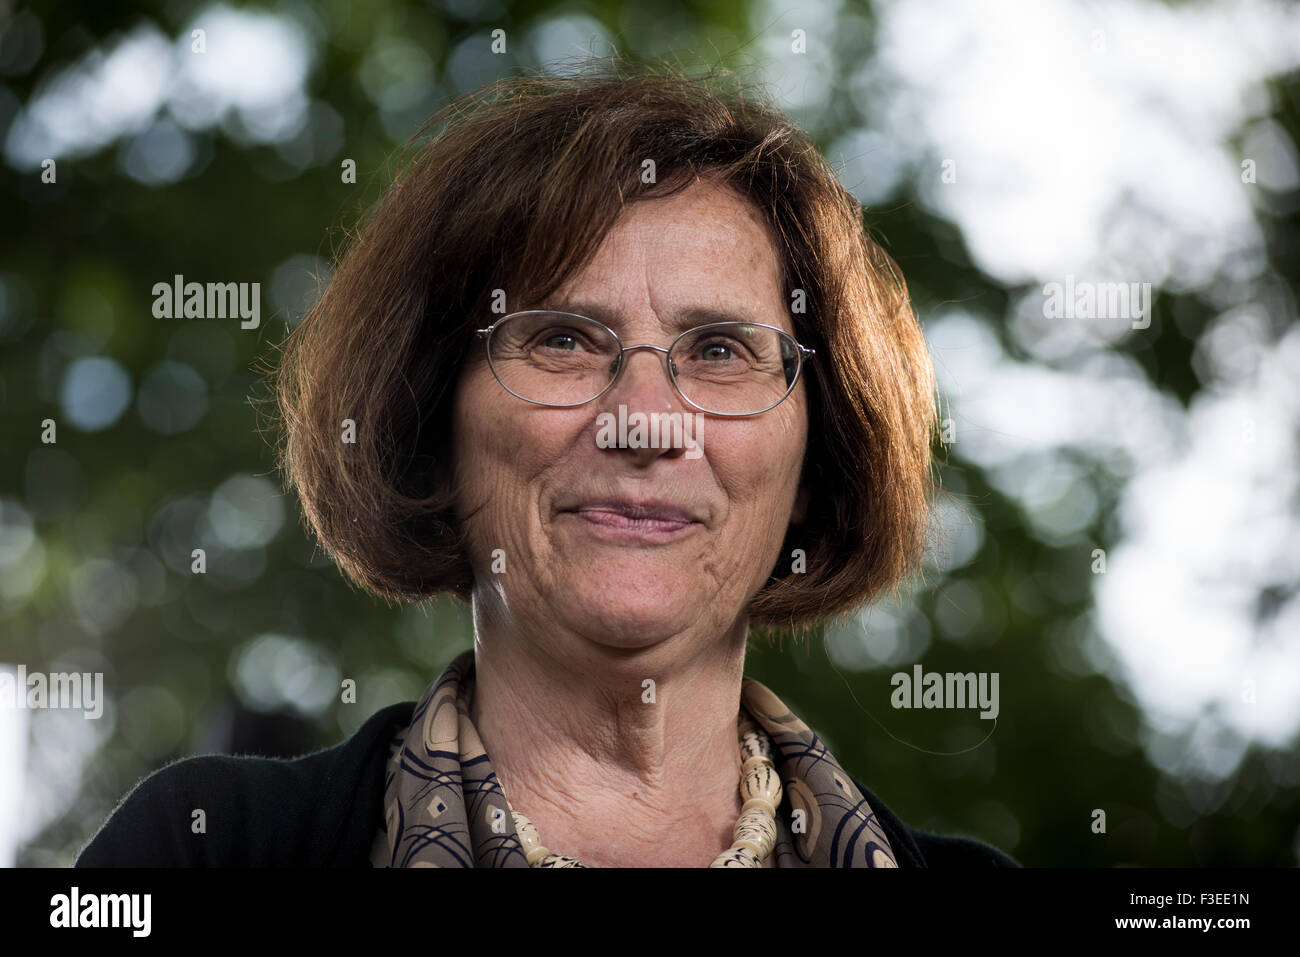 Professor and President of Wolfson College in Oxford, Hermione Lee. Stock Photo